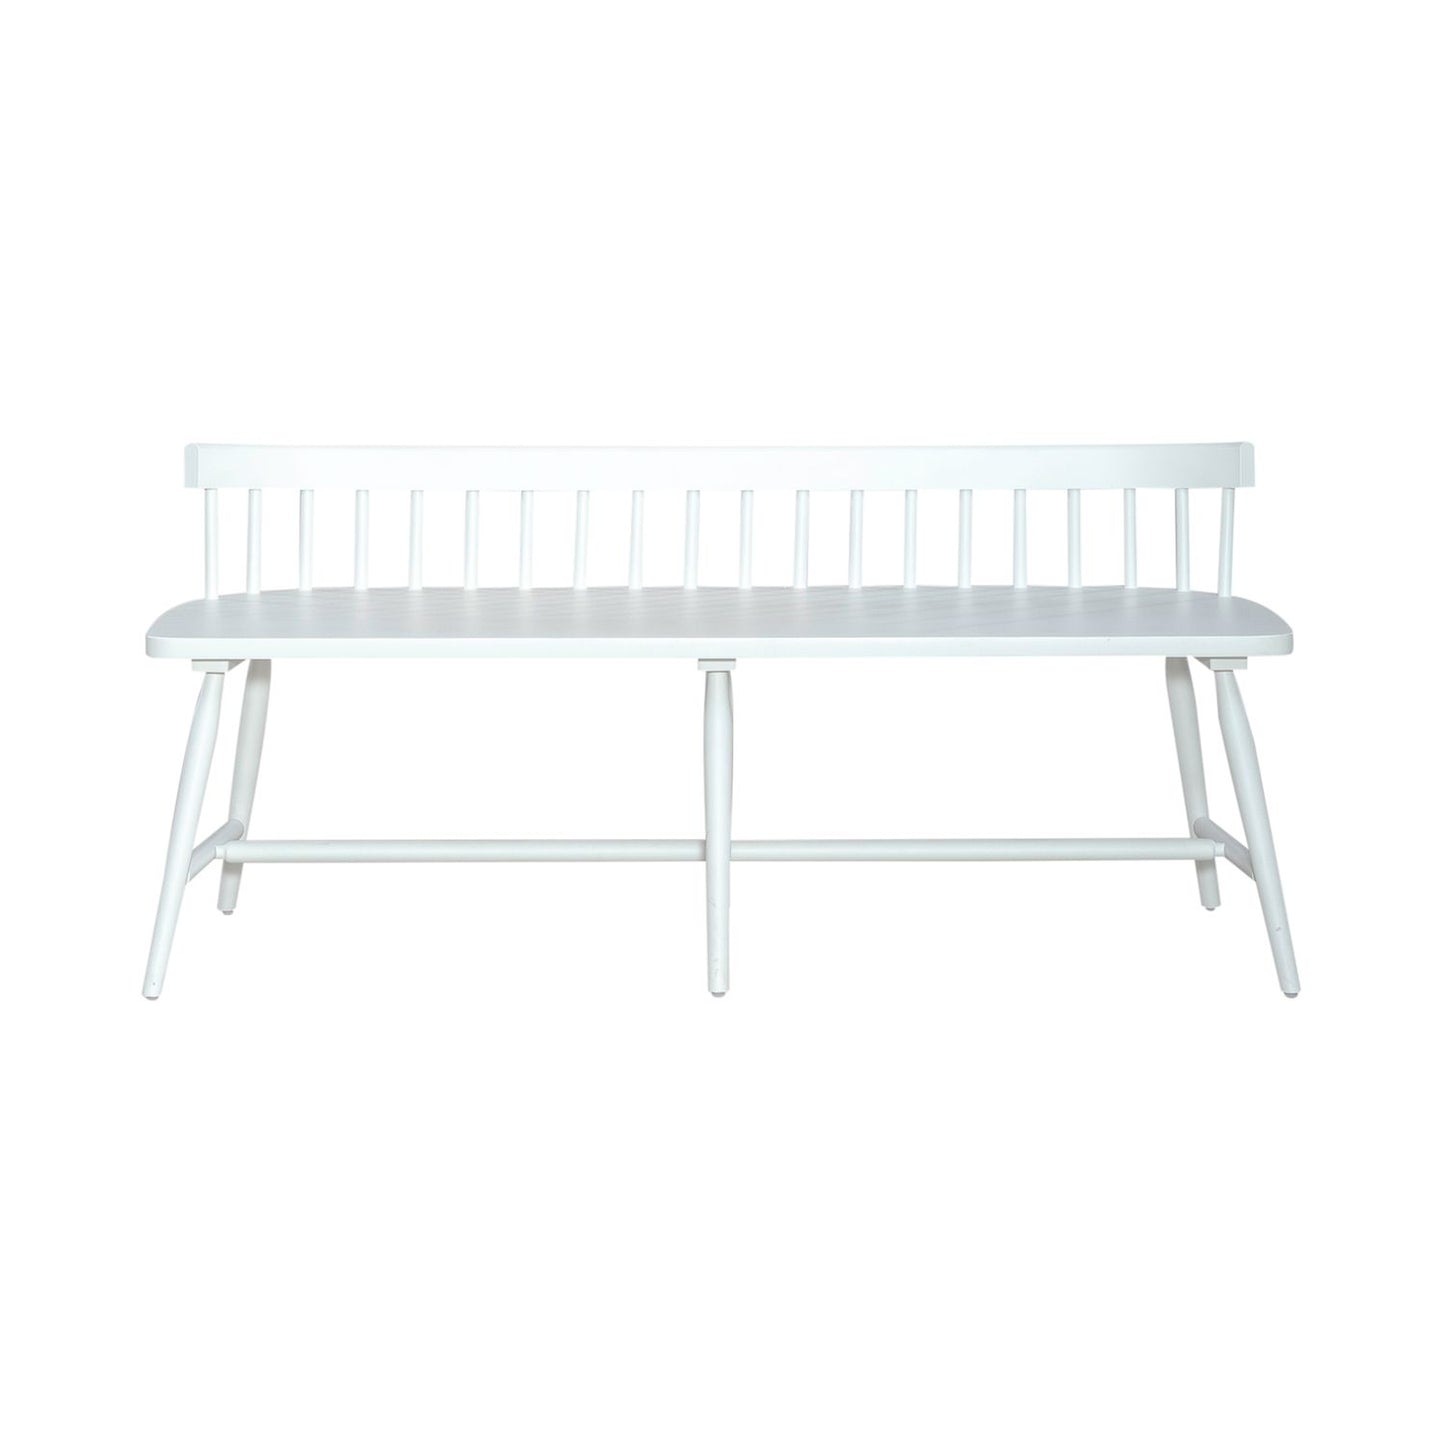 Palmetto Heights - Low Back Spindle Bench